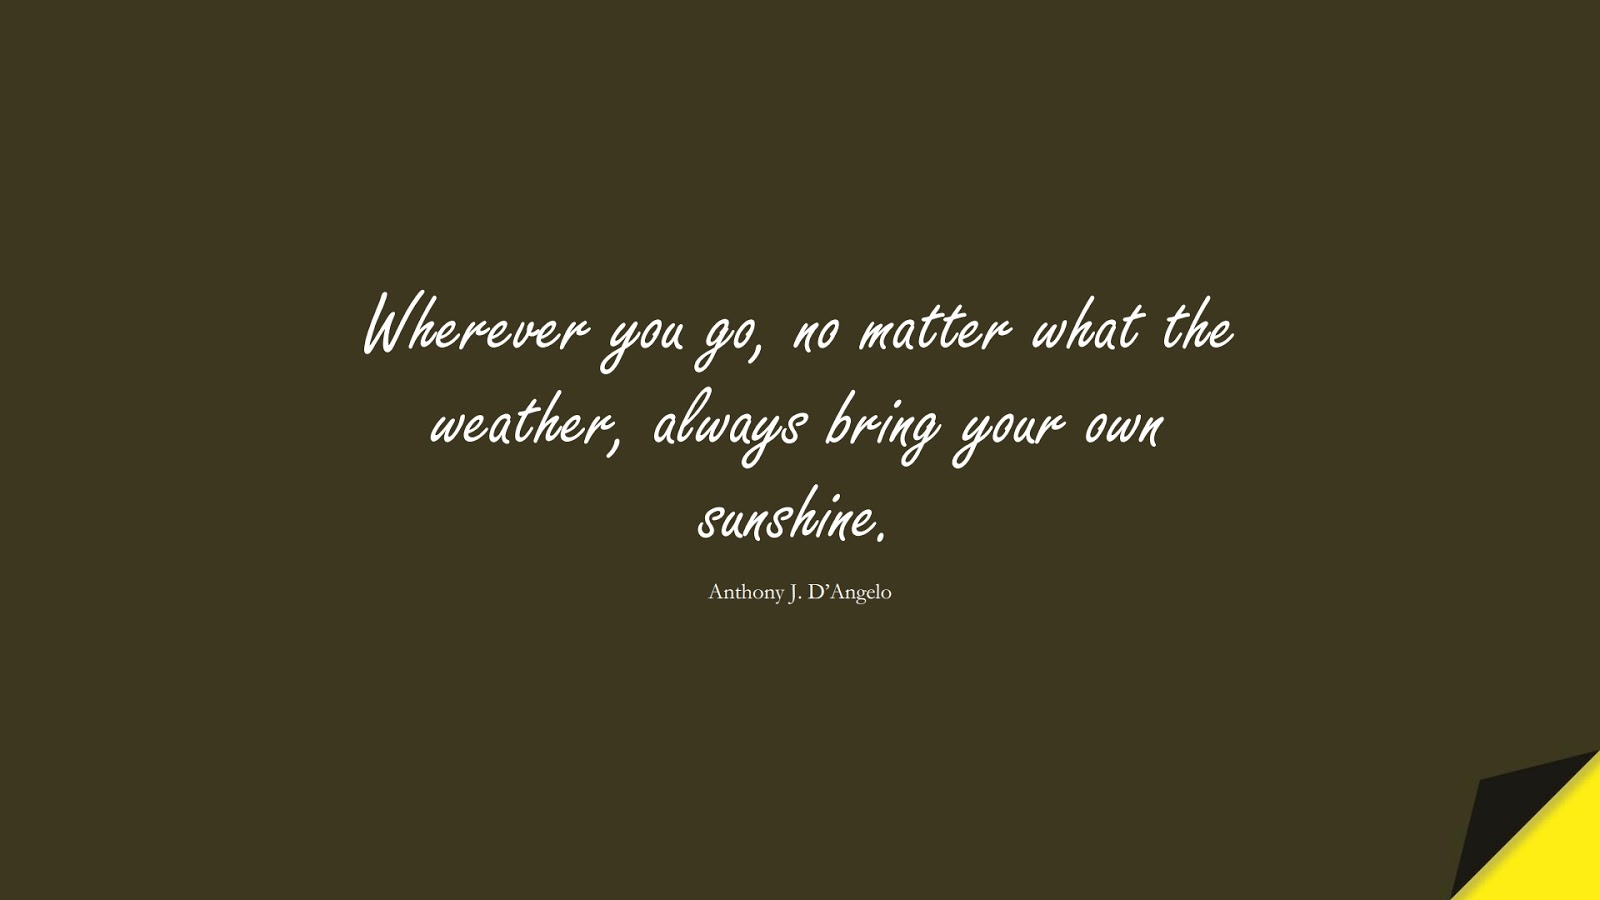 Wherever you go, no matter what the weather, always bring your own sunshine. (Anthony J. D’Angelo);  #PositiveQuotes